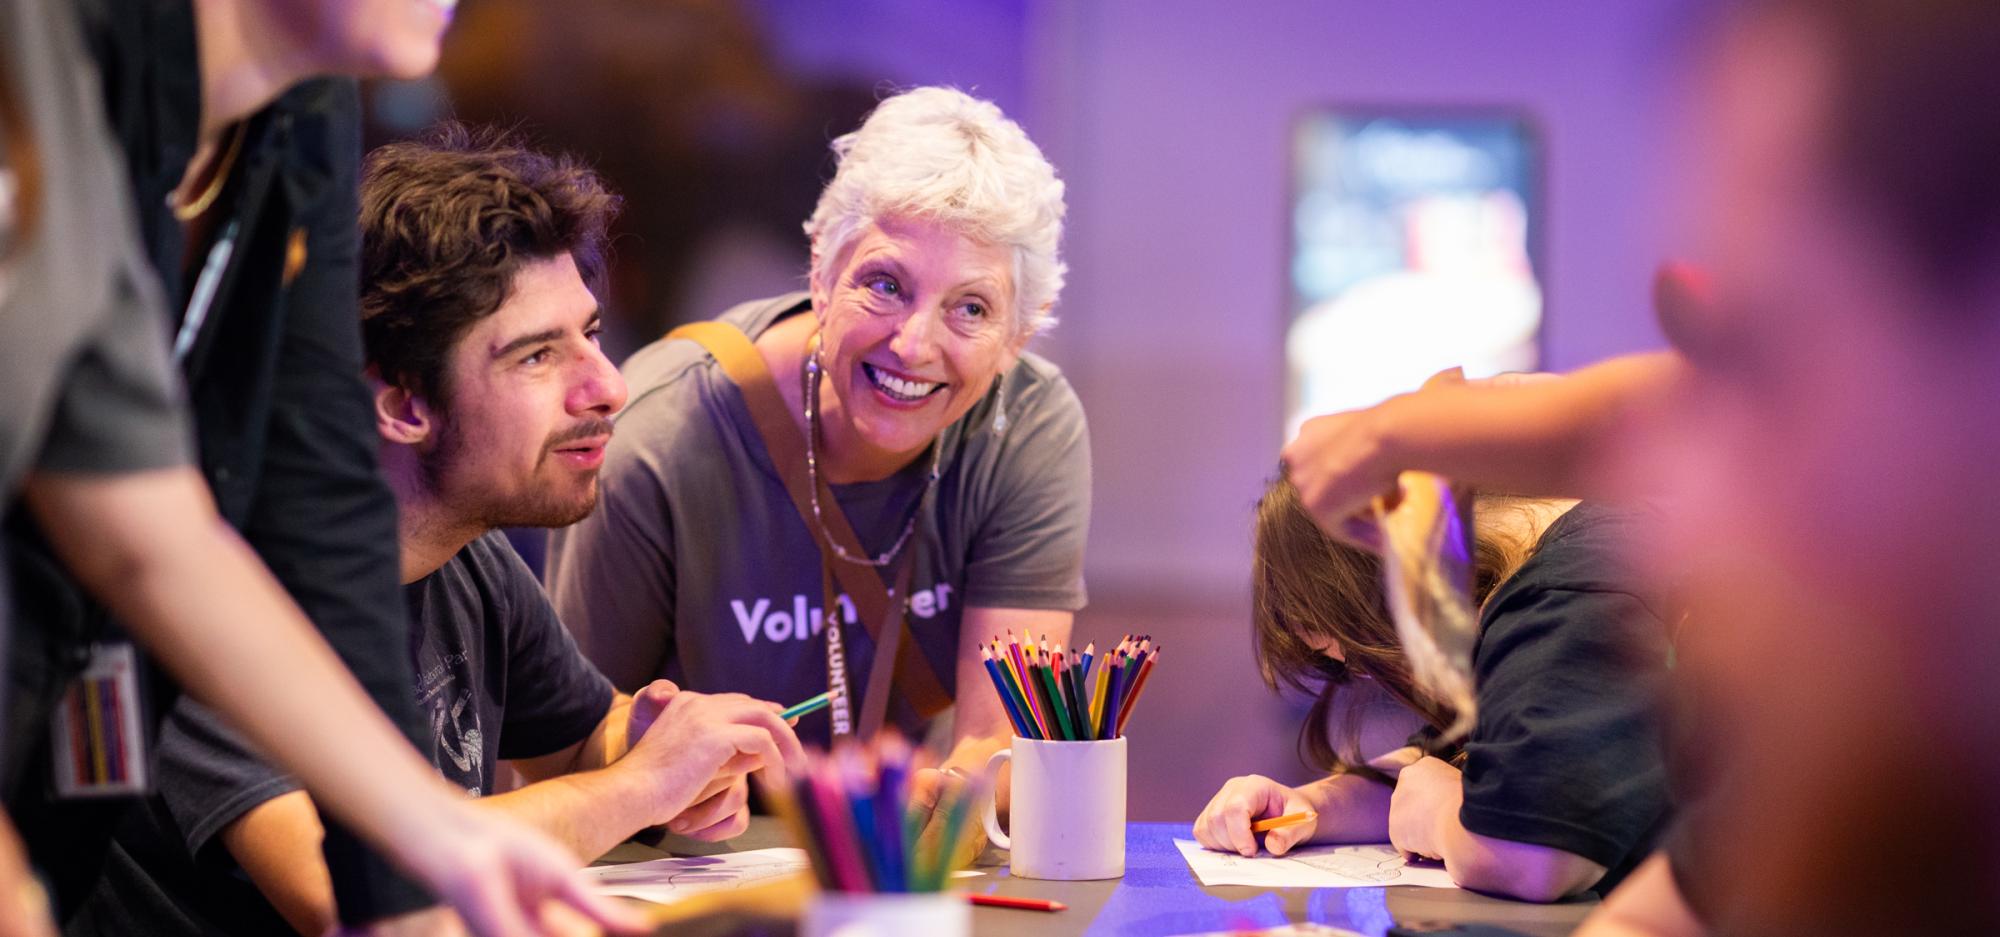 A small group of people sit at a table with paper and pencils in a colourful purple and blue lit gallery. A volunteer in a grey shirt leans over the table and smiles at the group